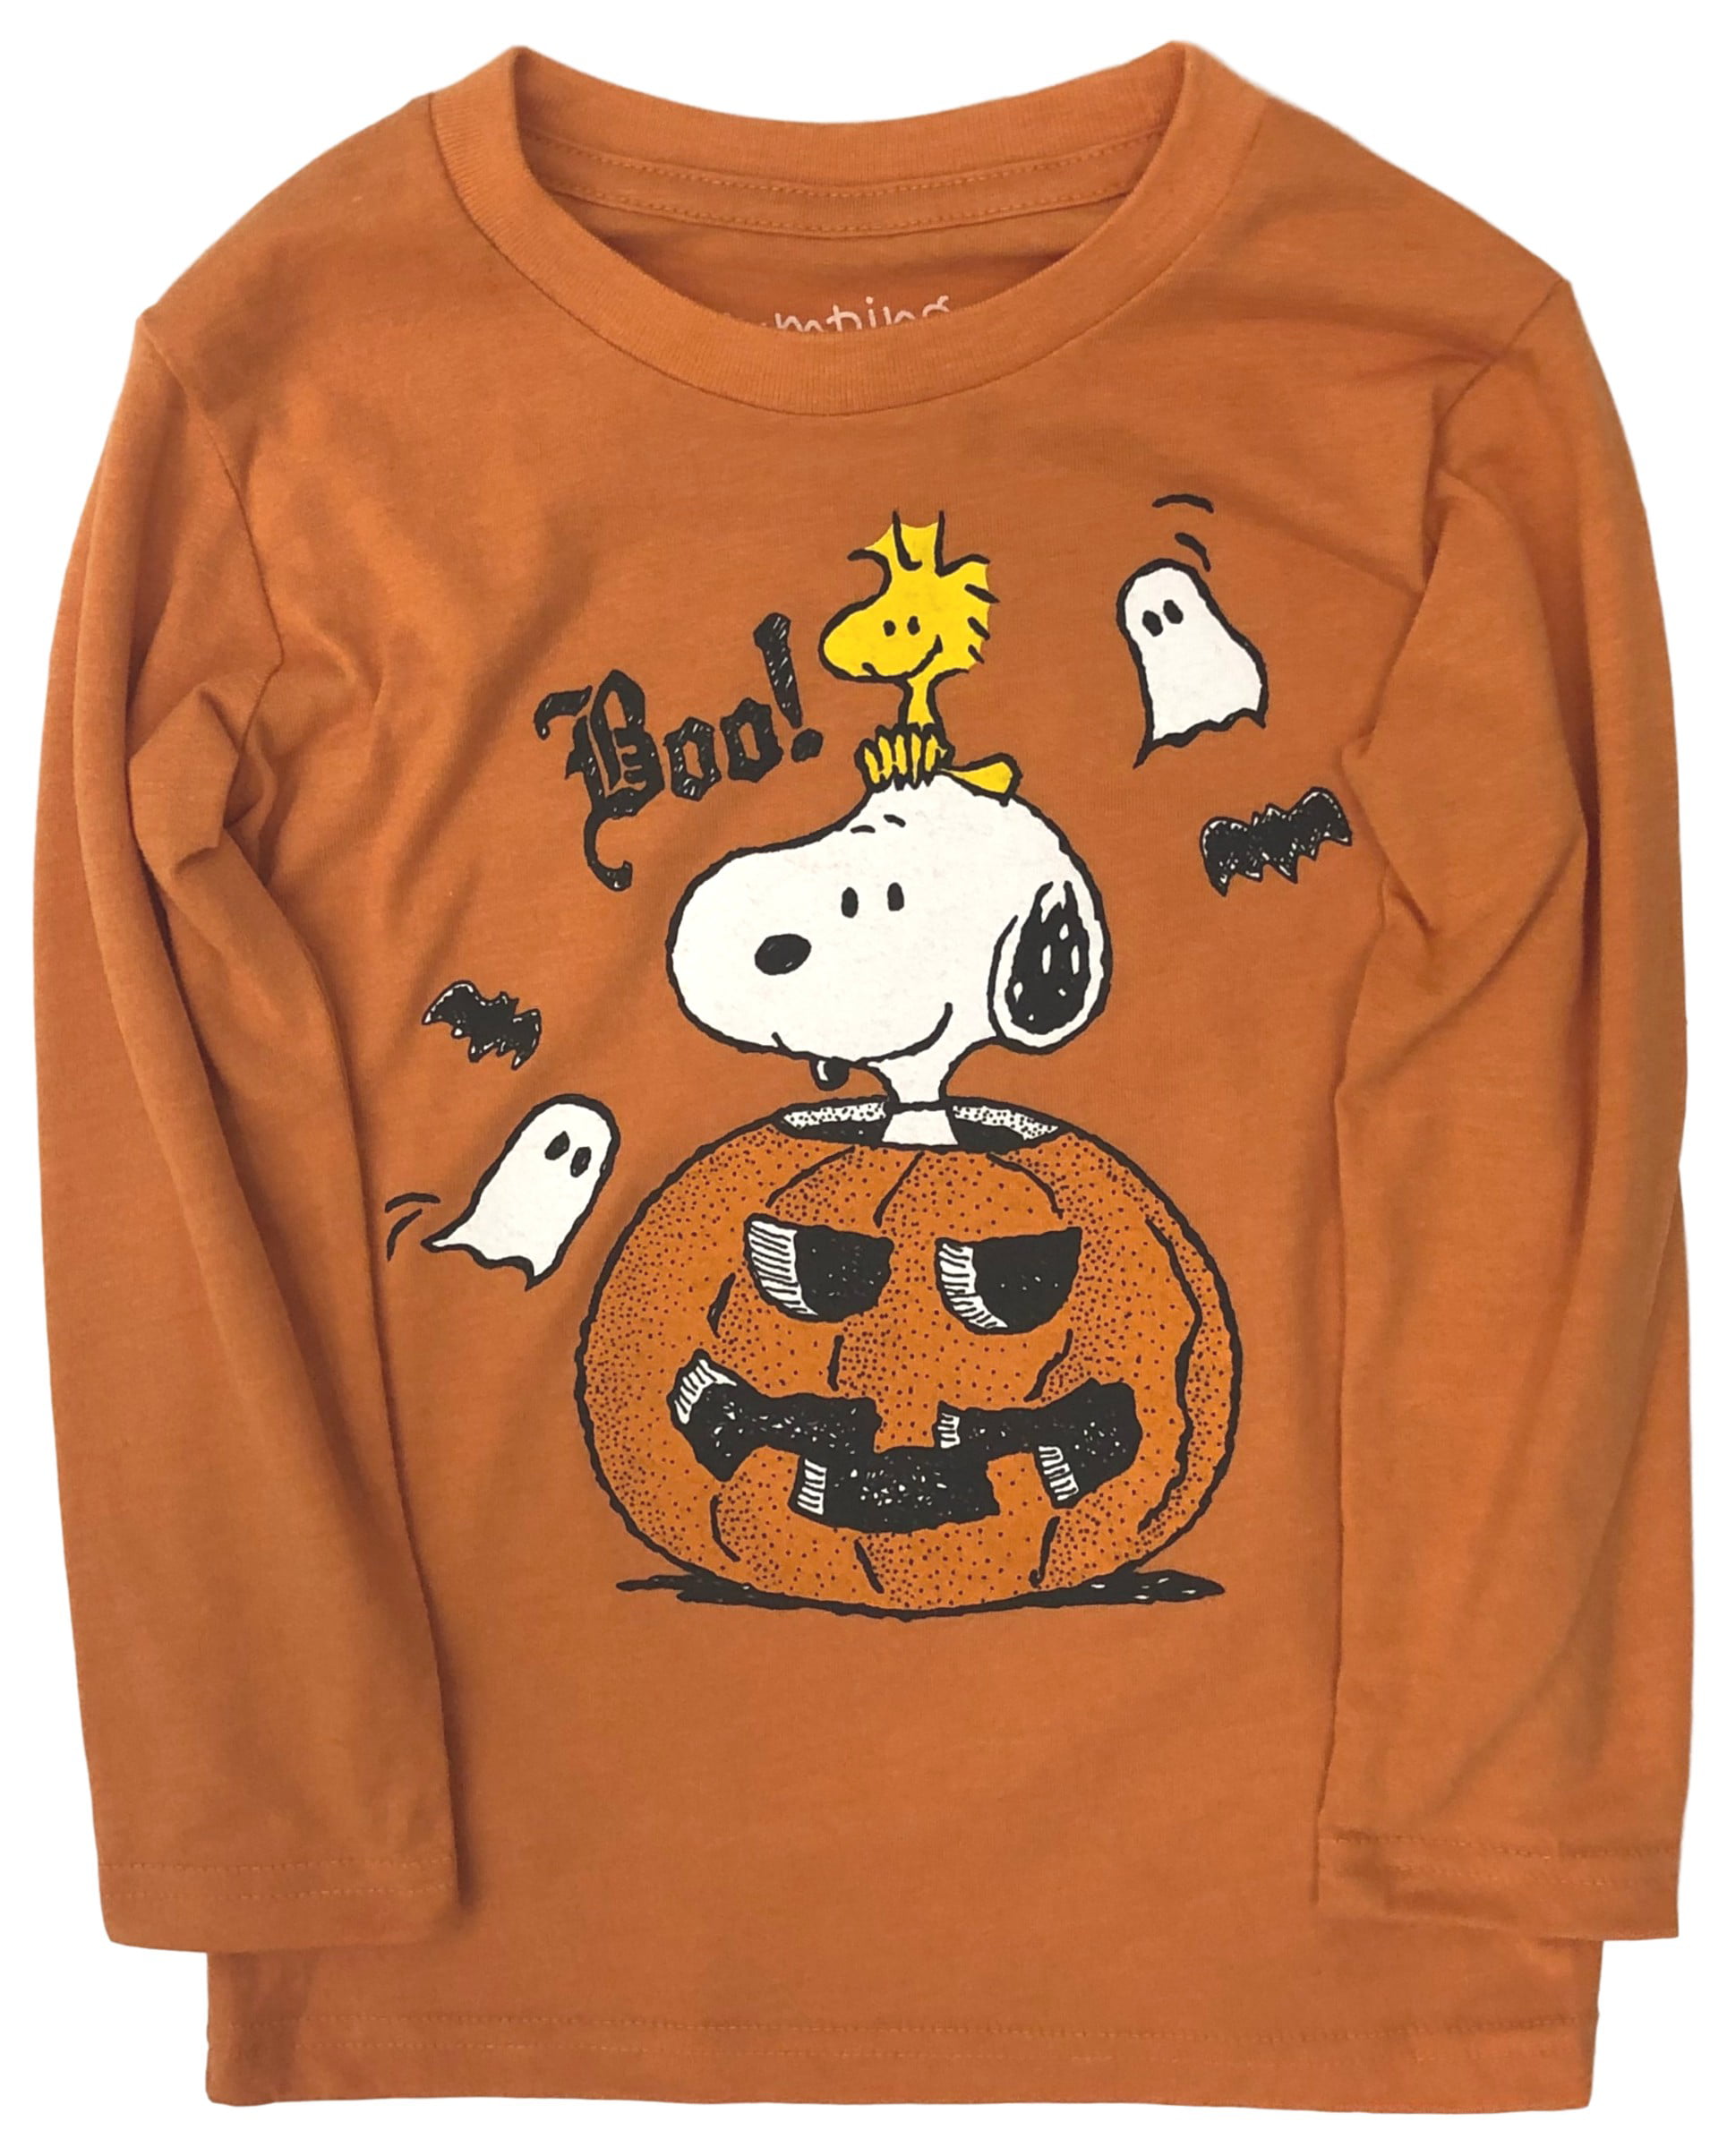 NEW HALLOWEEN IS COOL SNOOPY PEANUTS YOUTH SIZE 5/6-7-8/10-12/14 SHIRT 